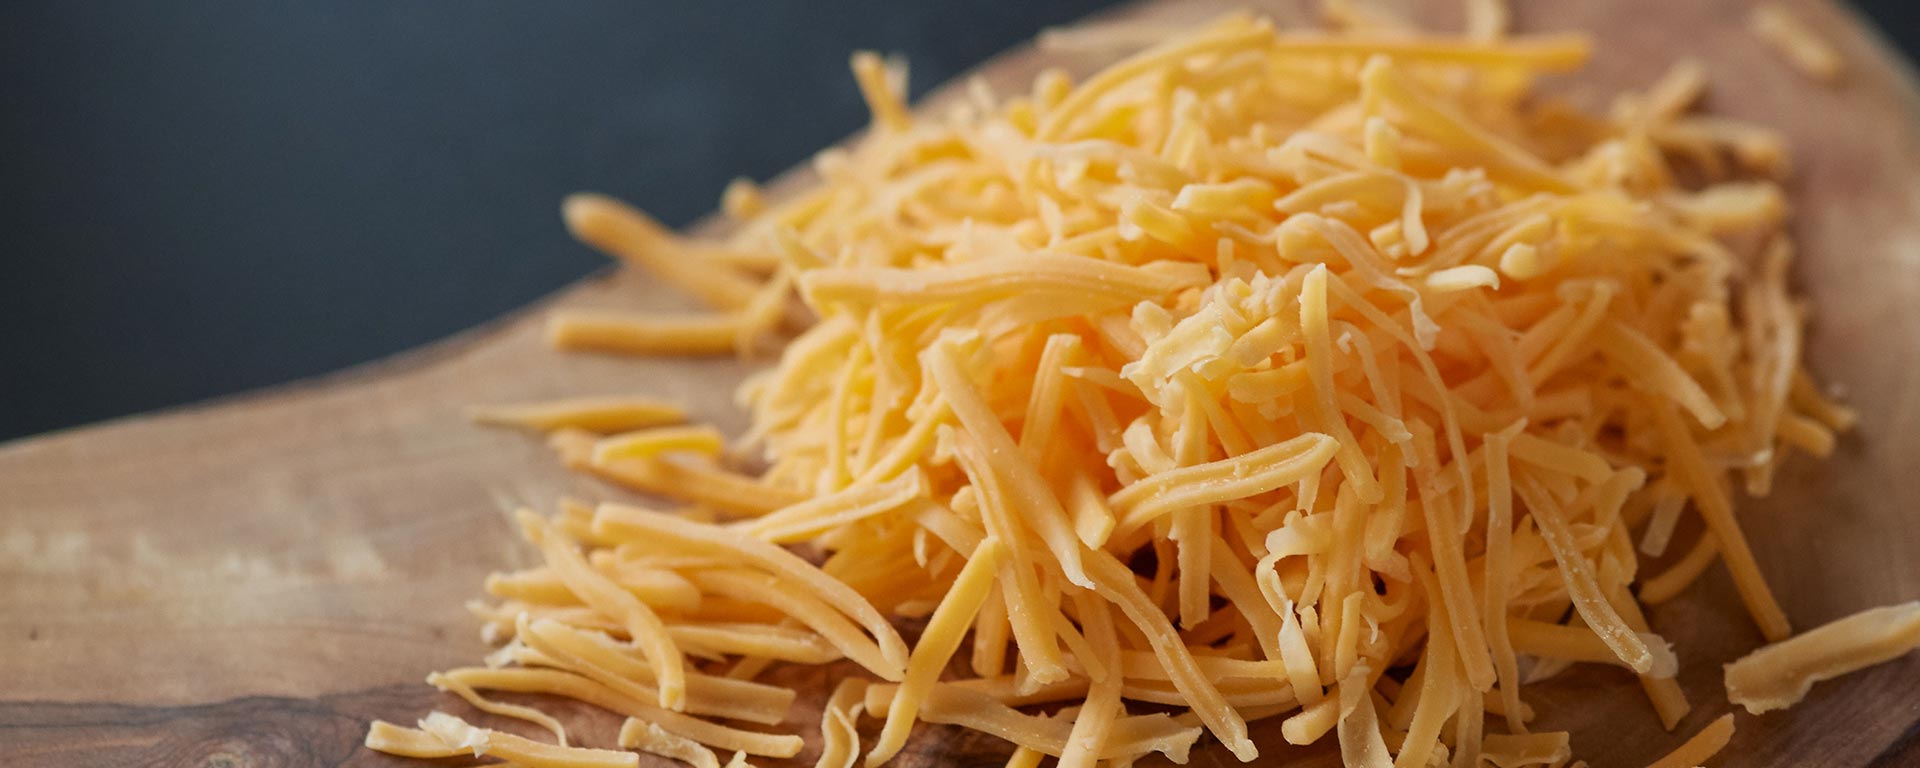 Shredded cheese on a block of wood